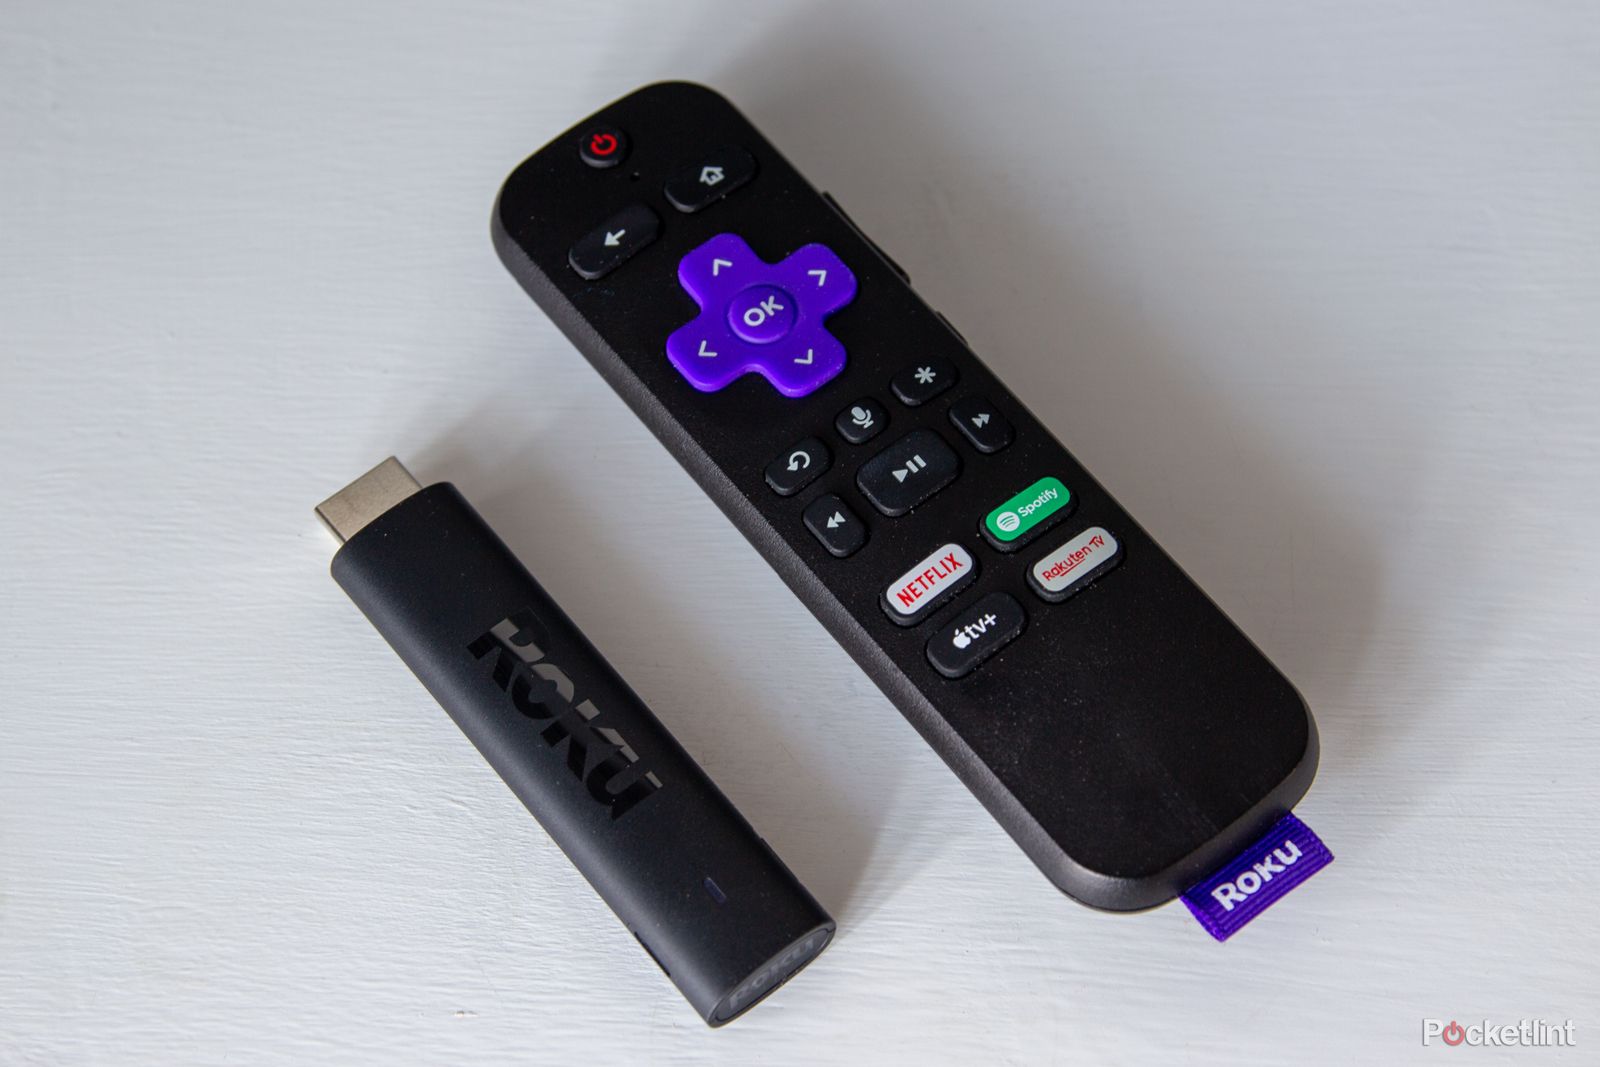  Roku Streaming Stick 4K 2021 Device HDR/D. Vision with